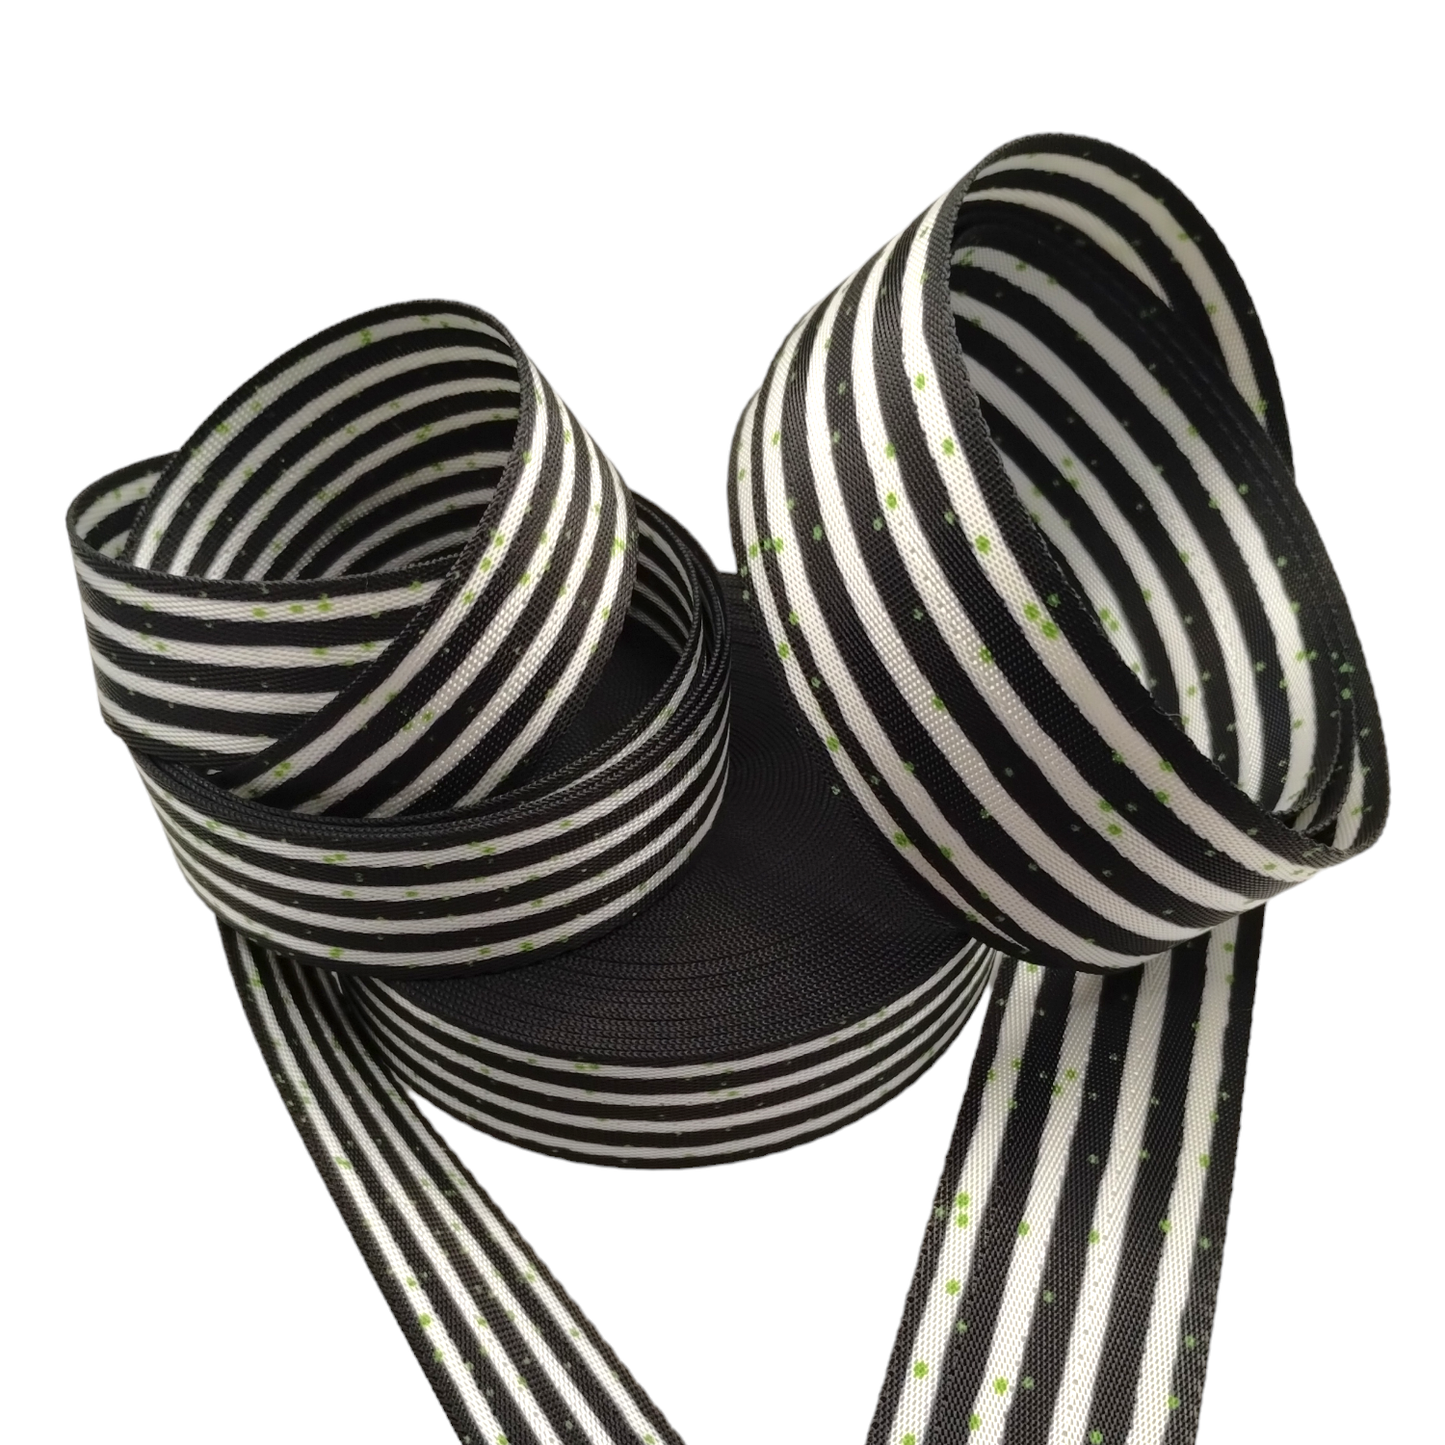 Wonky BJ Stripes Webbing - 2 sizes - sold by the meter Atelier Fiber Arts